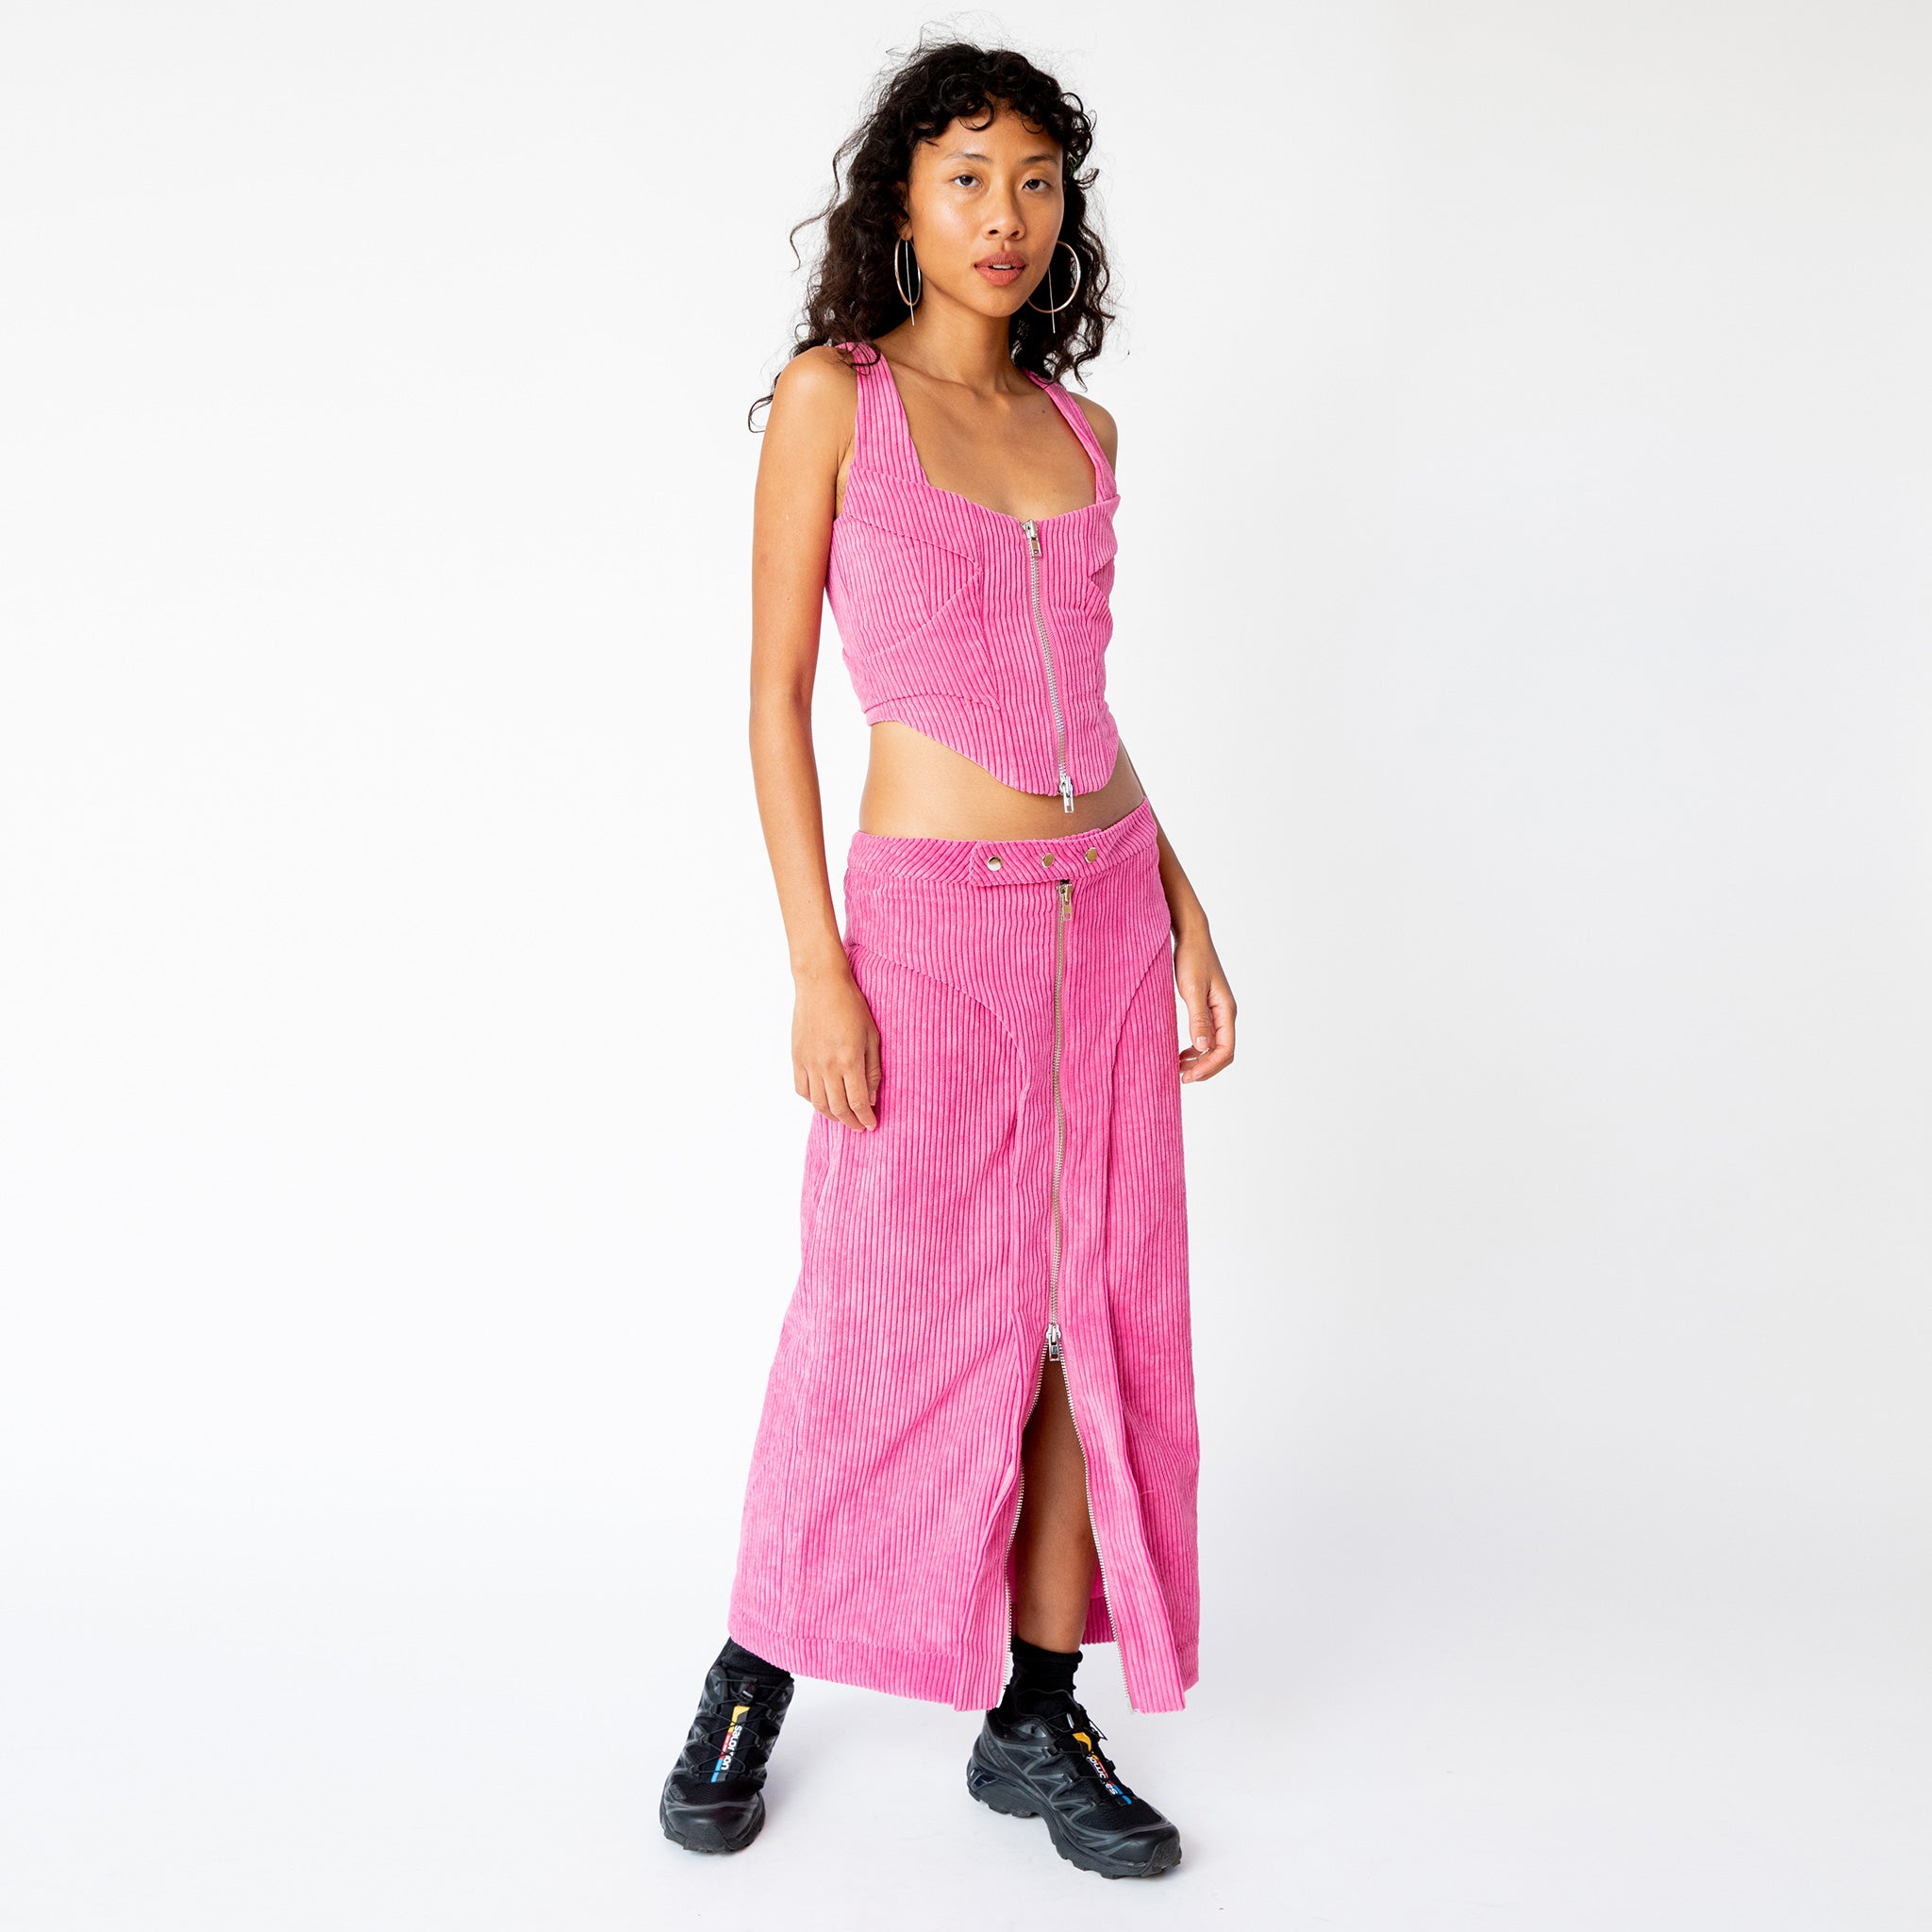 A model wears the full length pink corduroy Cord Zip Skirt by Eckhaus Latta, with full length silver front zipper and 3 front waistband button snaps, paired here with the matching full length corduroy zip up bustier and black sneakers.